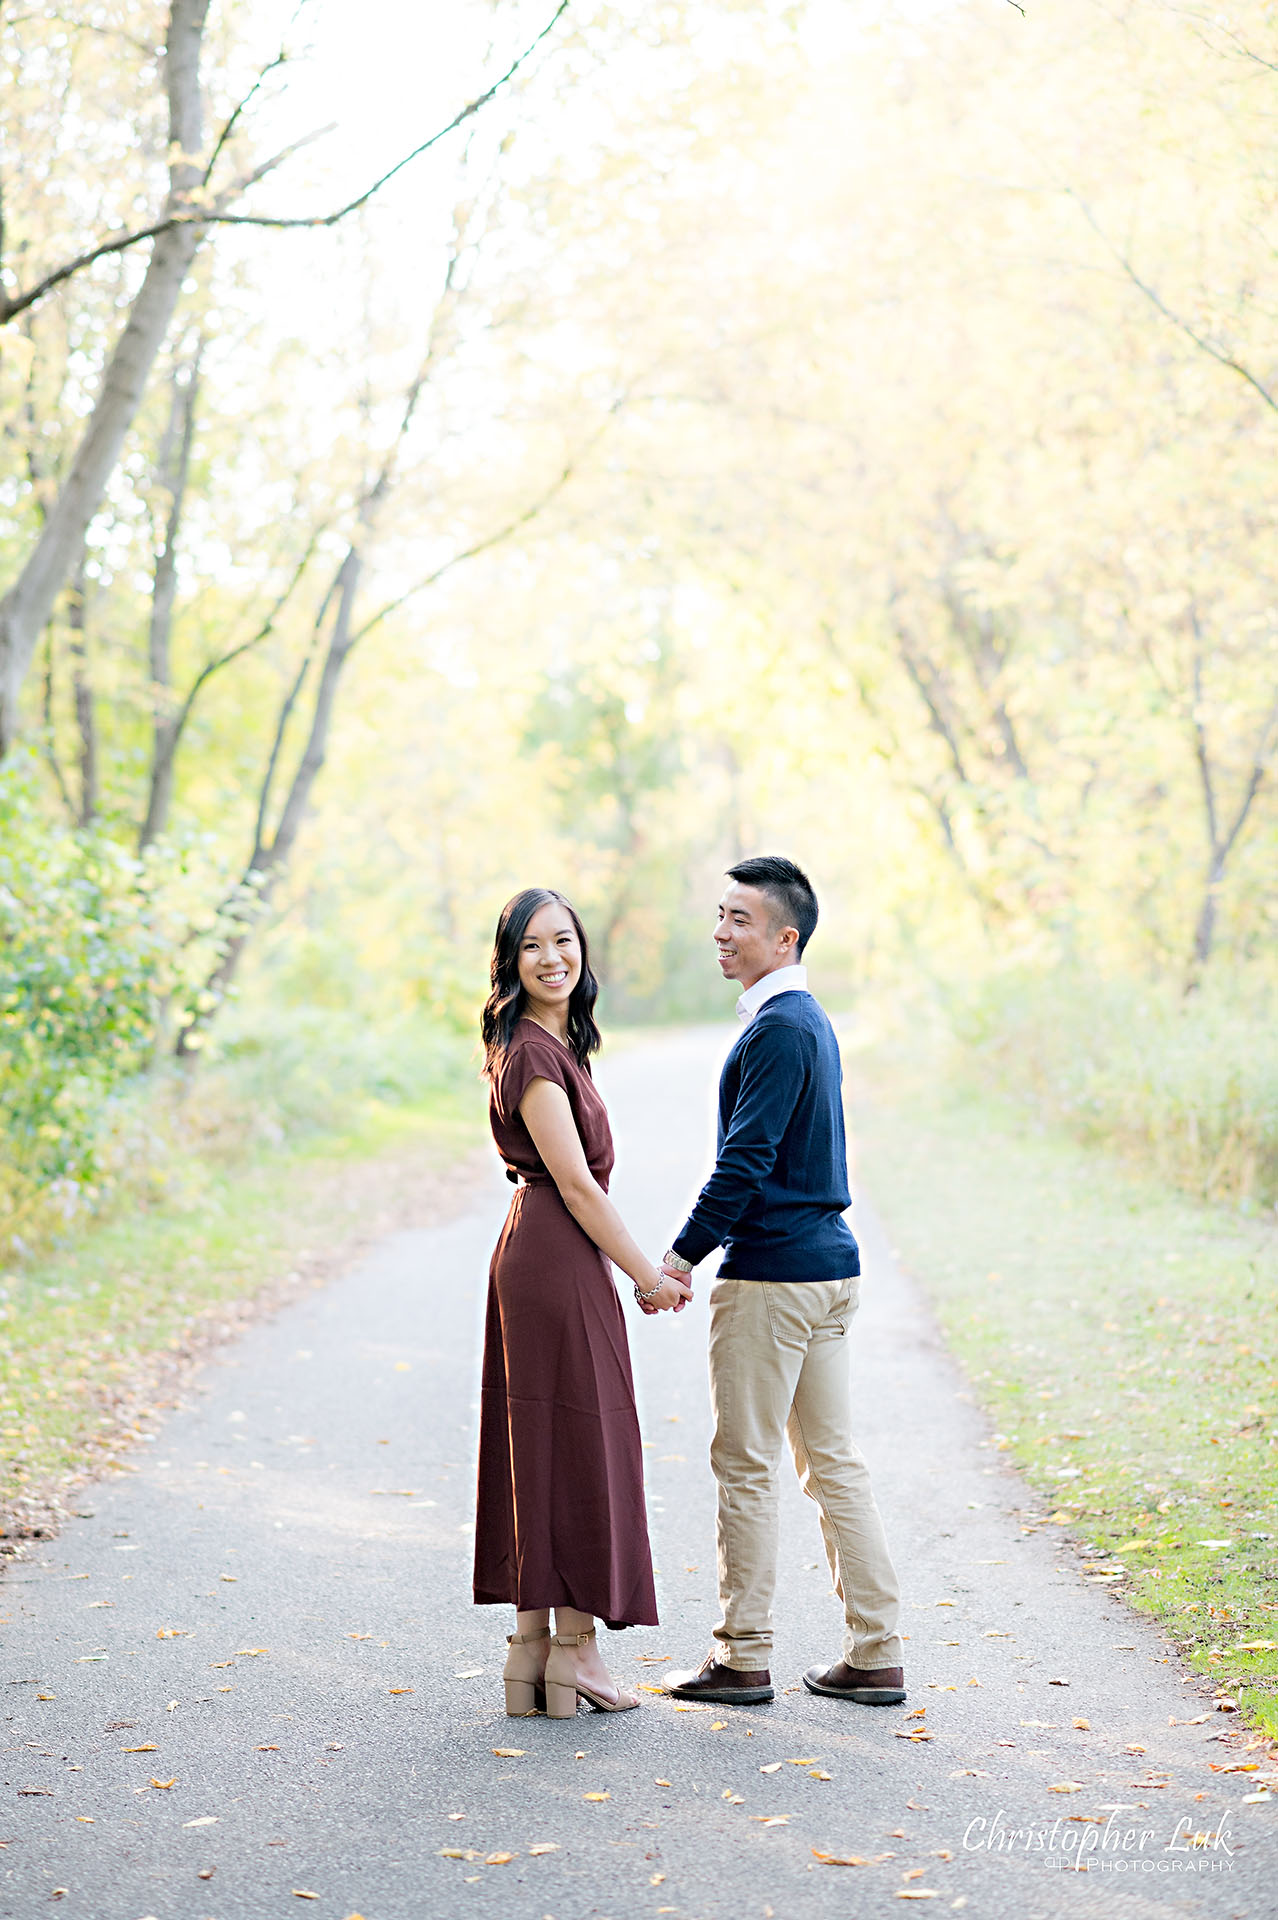 Christopher Luk Toronto Wedding Engagement Session Photographer Autumn Fall Leaves Natural Candid Photojournalistic Bride Groom Holding Hands Walking Together Pathway Hiking Trail